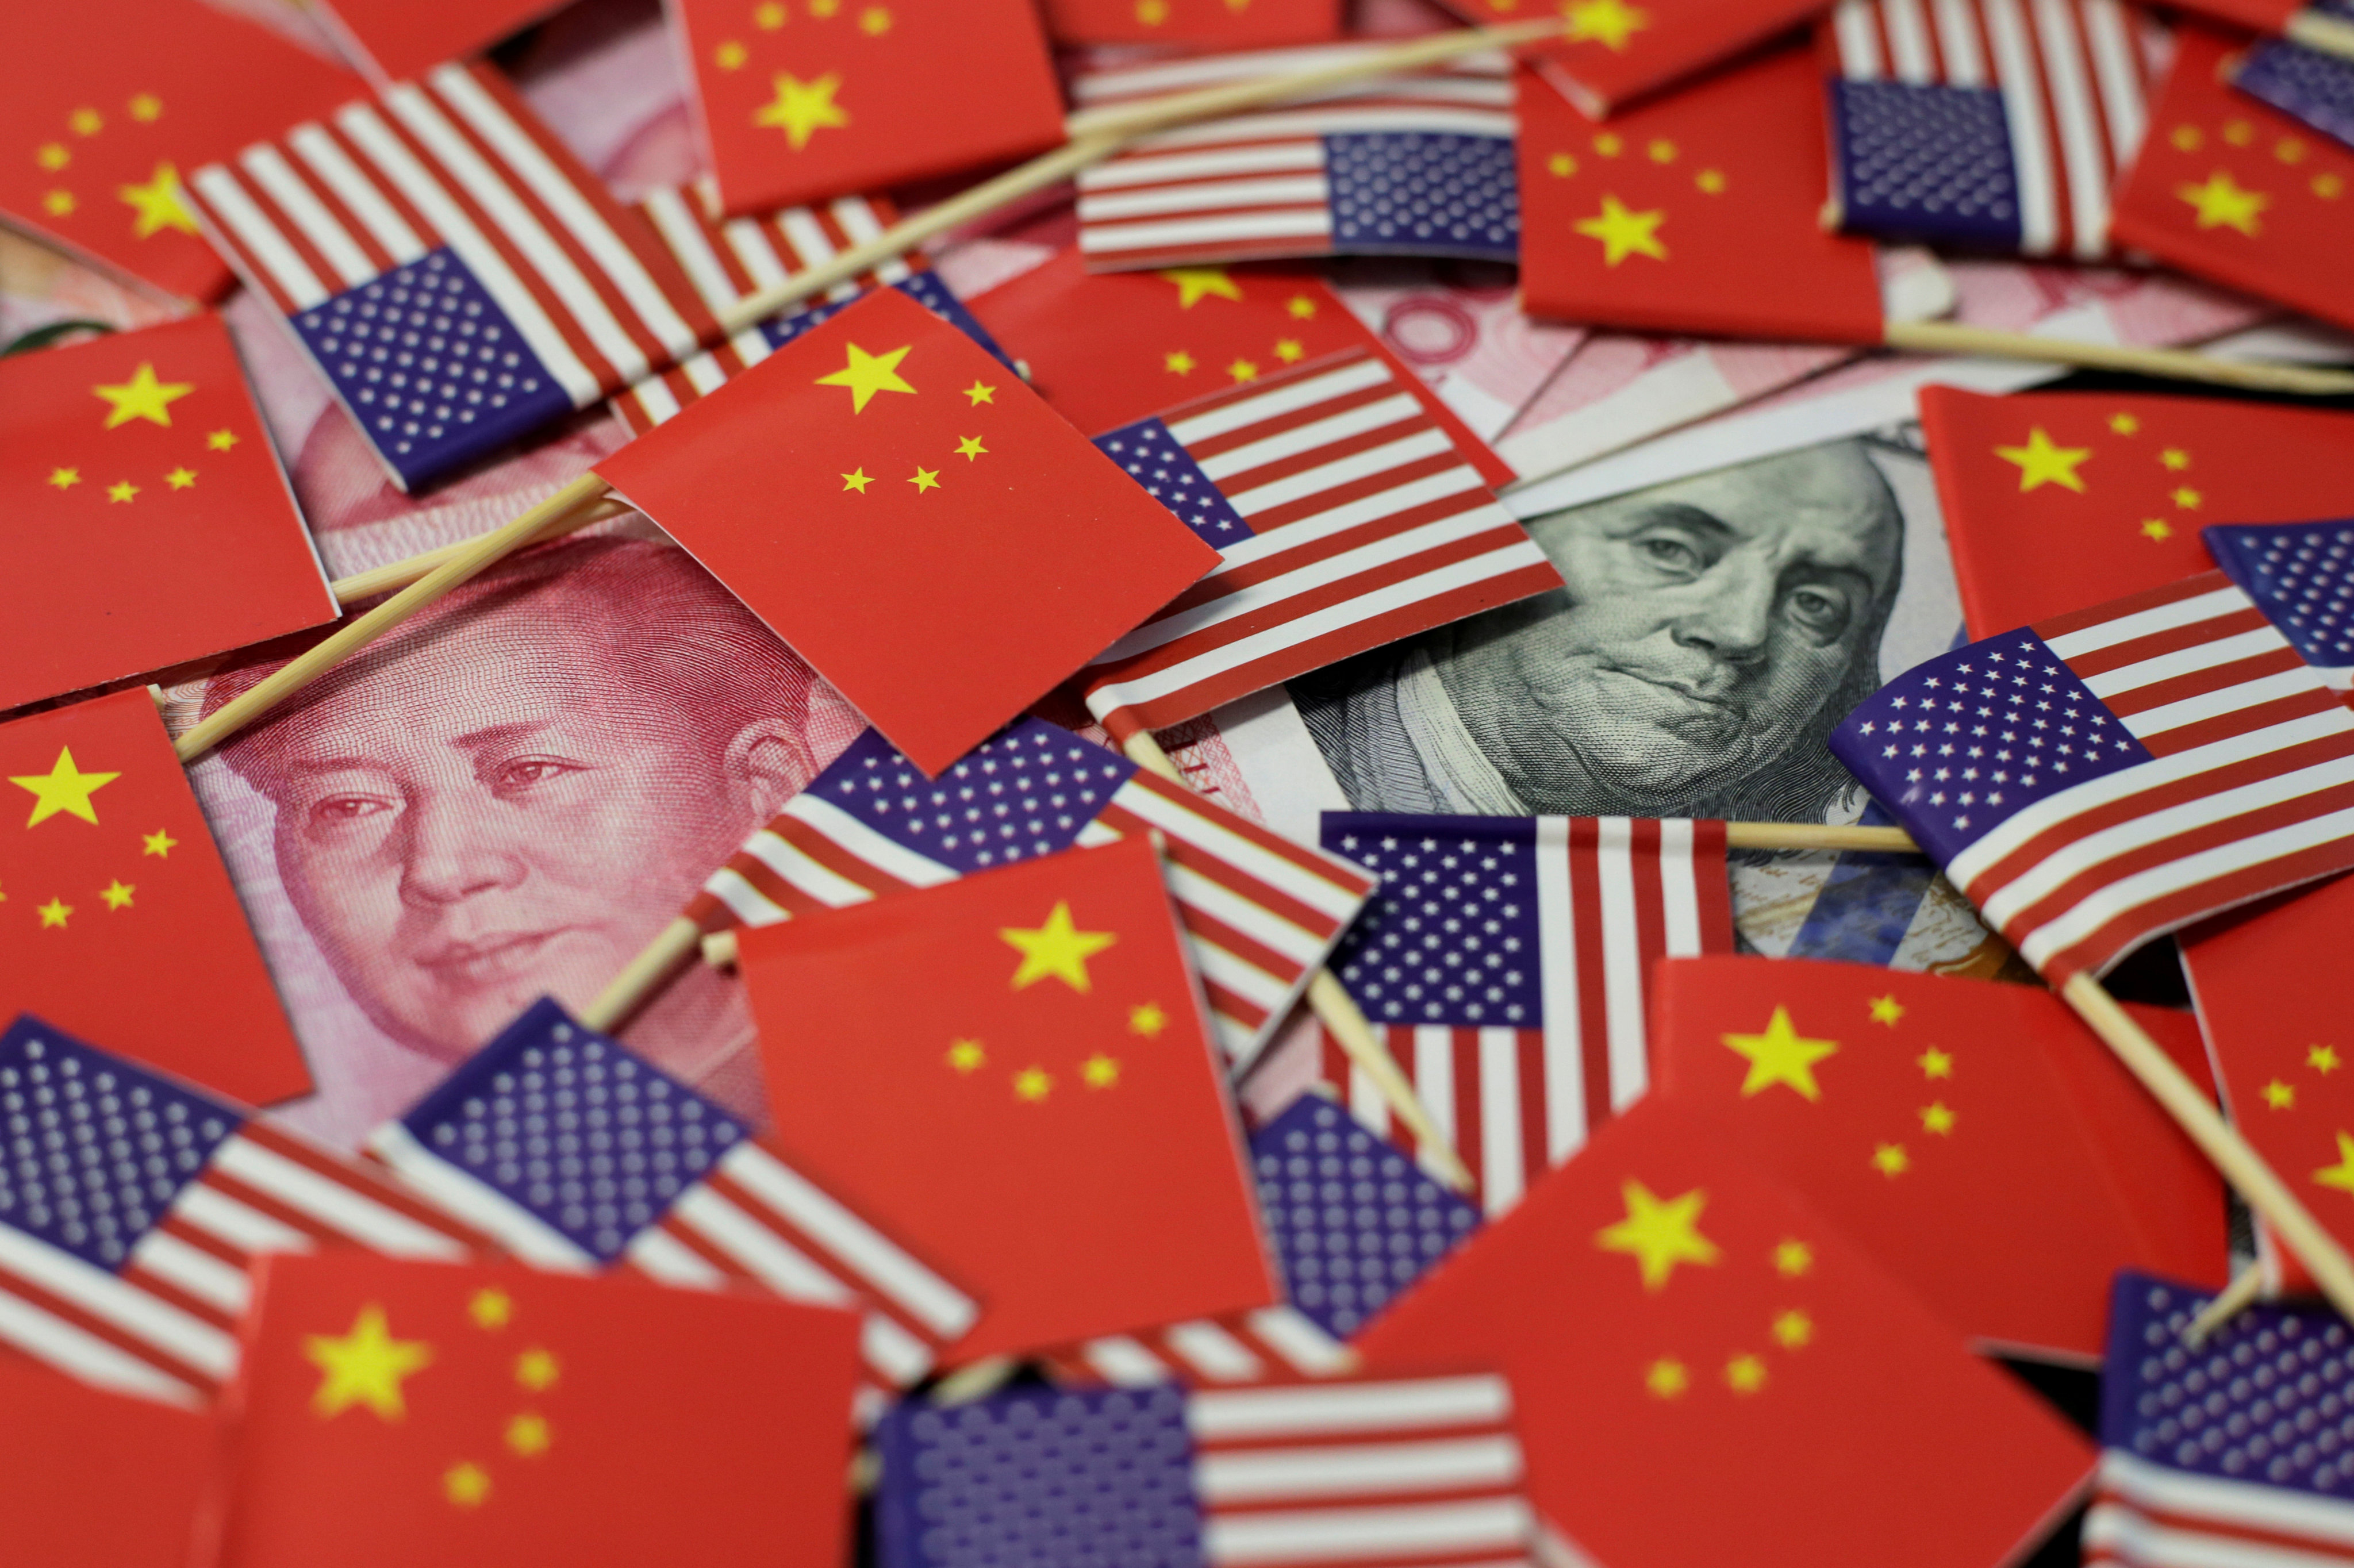 The late 2010s saw Chinese investors living the high life in the United States while pouring billions of dollars into Silicon Valley start-ups. But things changed as the relationship between Beijing and Washington soured. Photo: Reuters